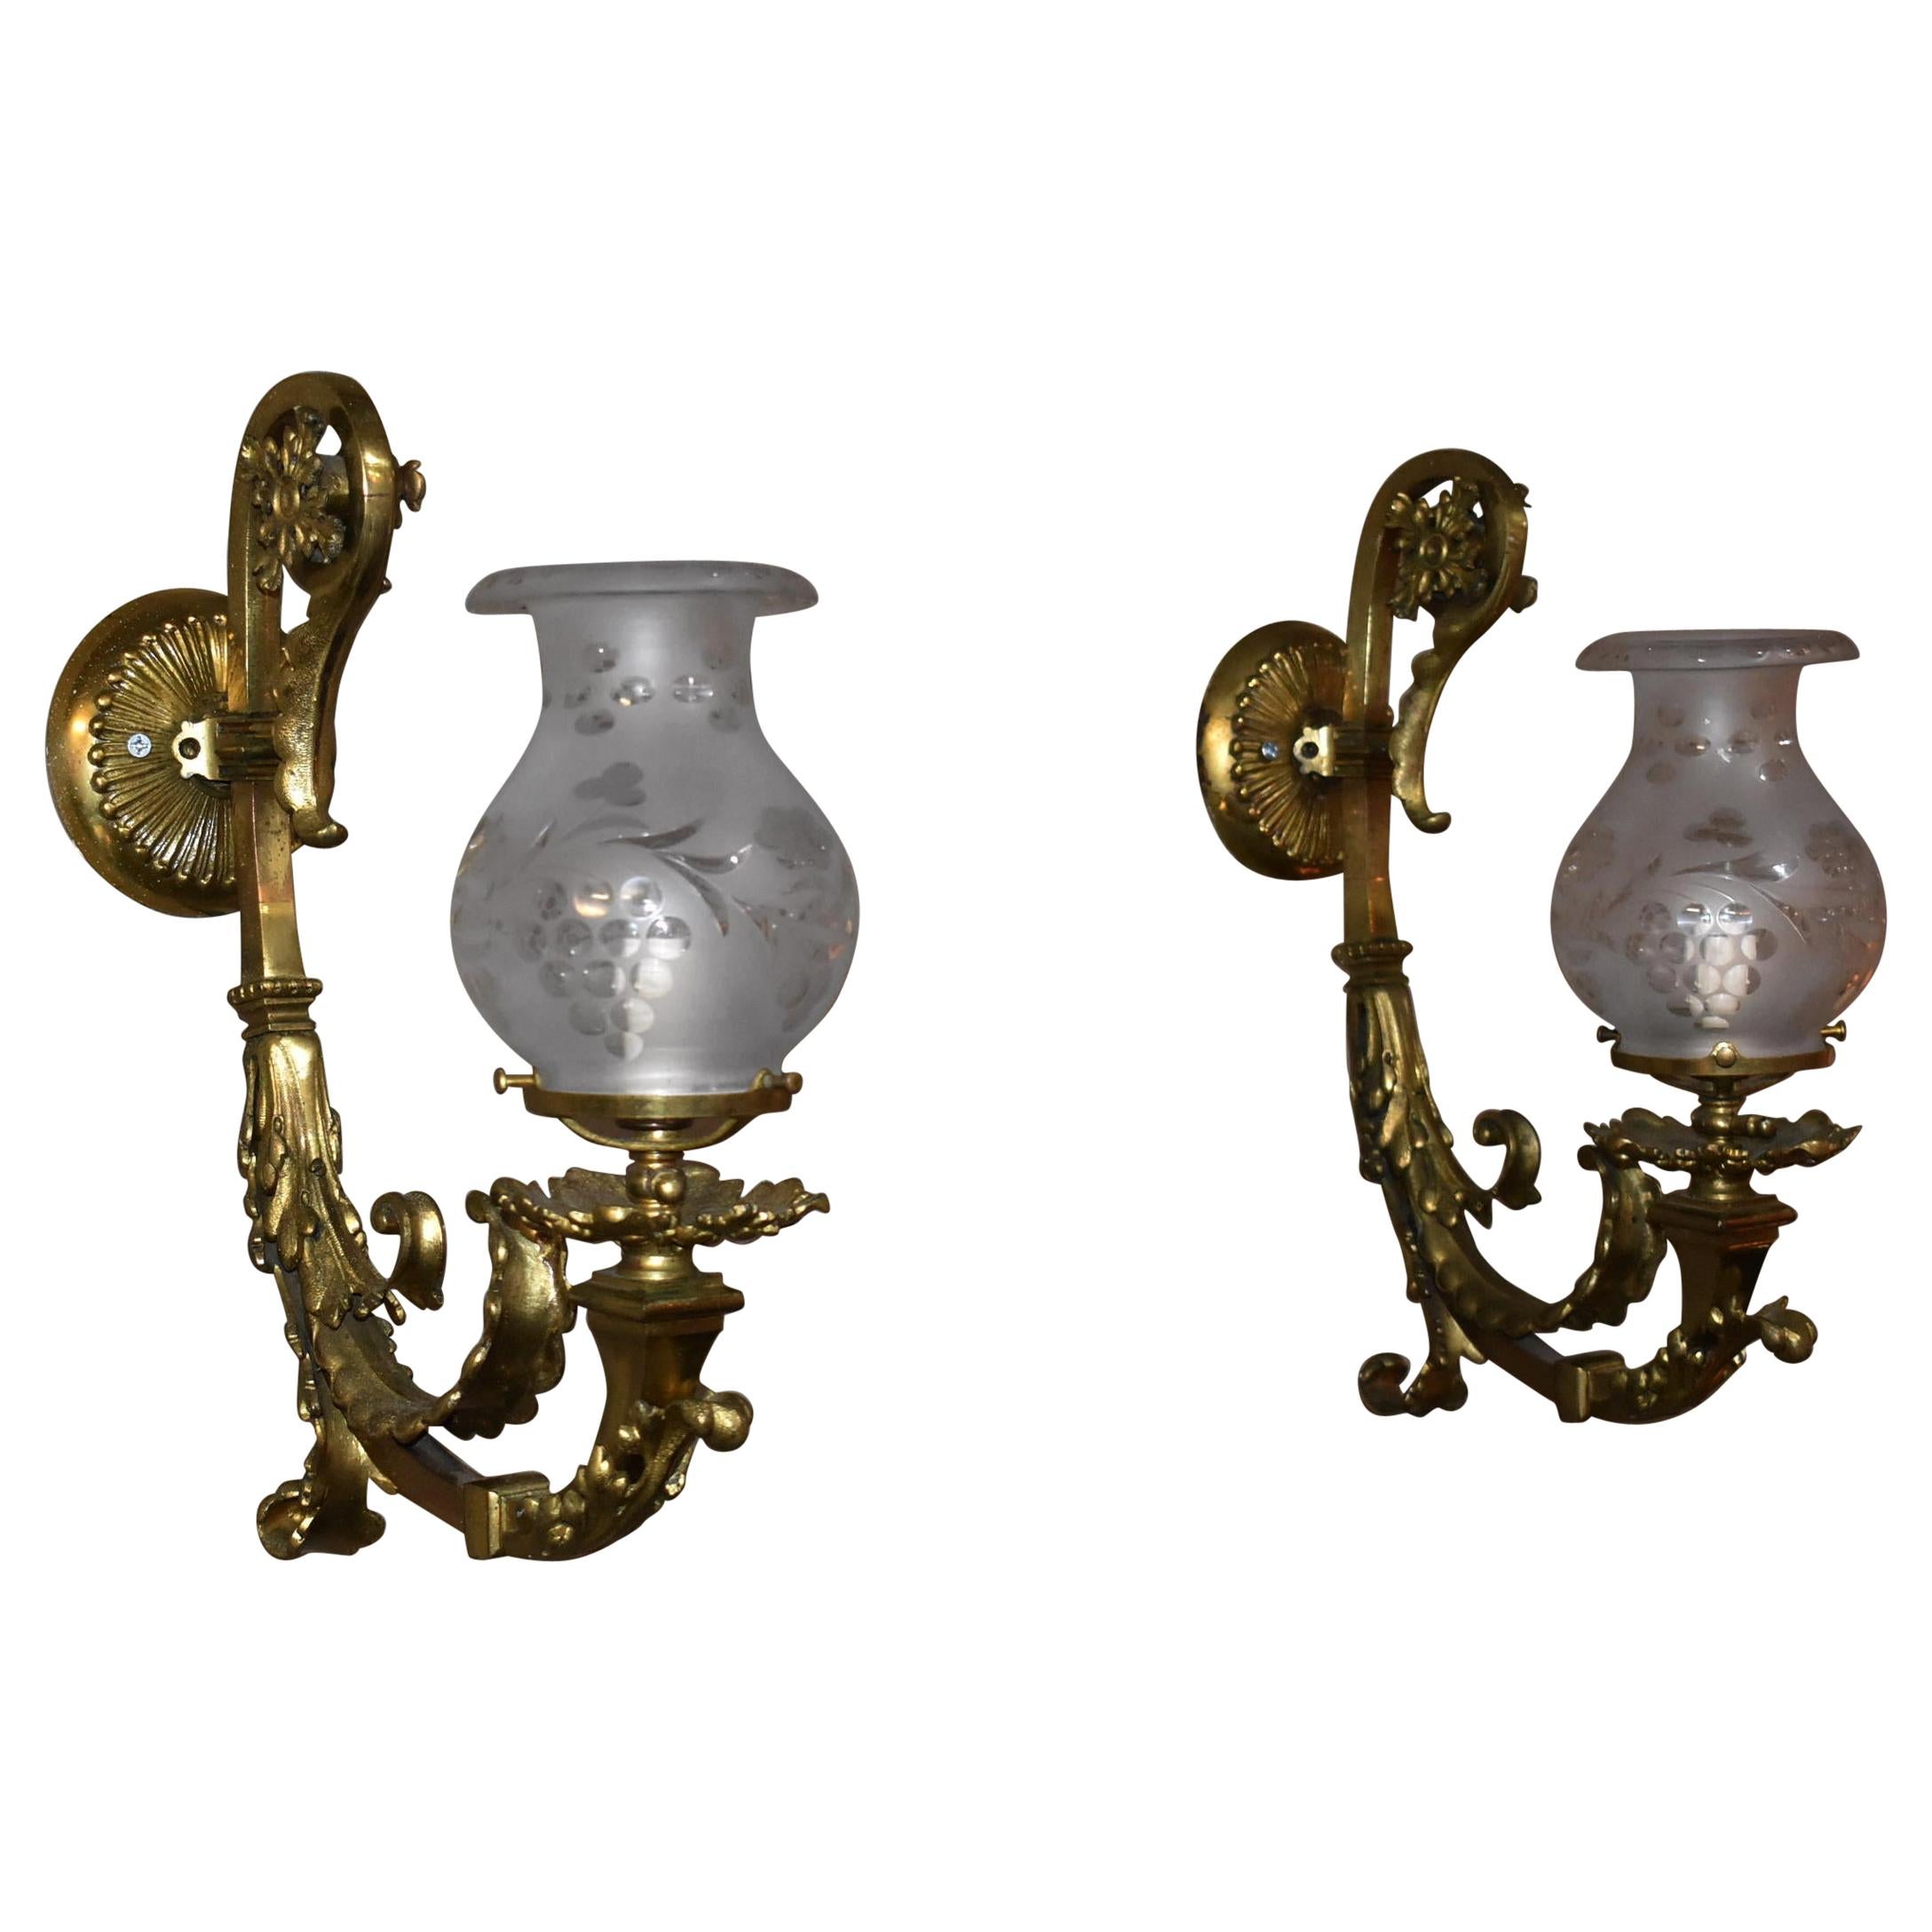 Pair of Antique Brass Ornate Wall Sconces Astral Cut and Polished Glass Shades	 For Sale